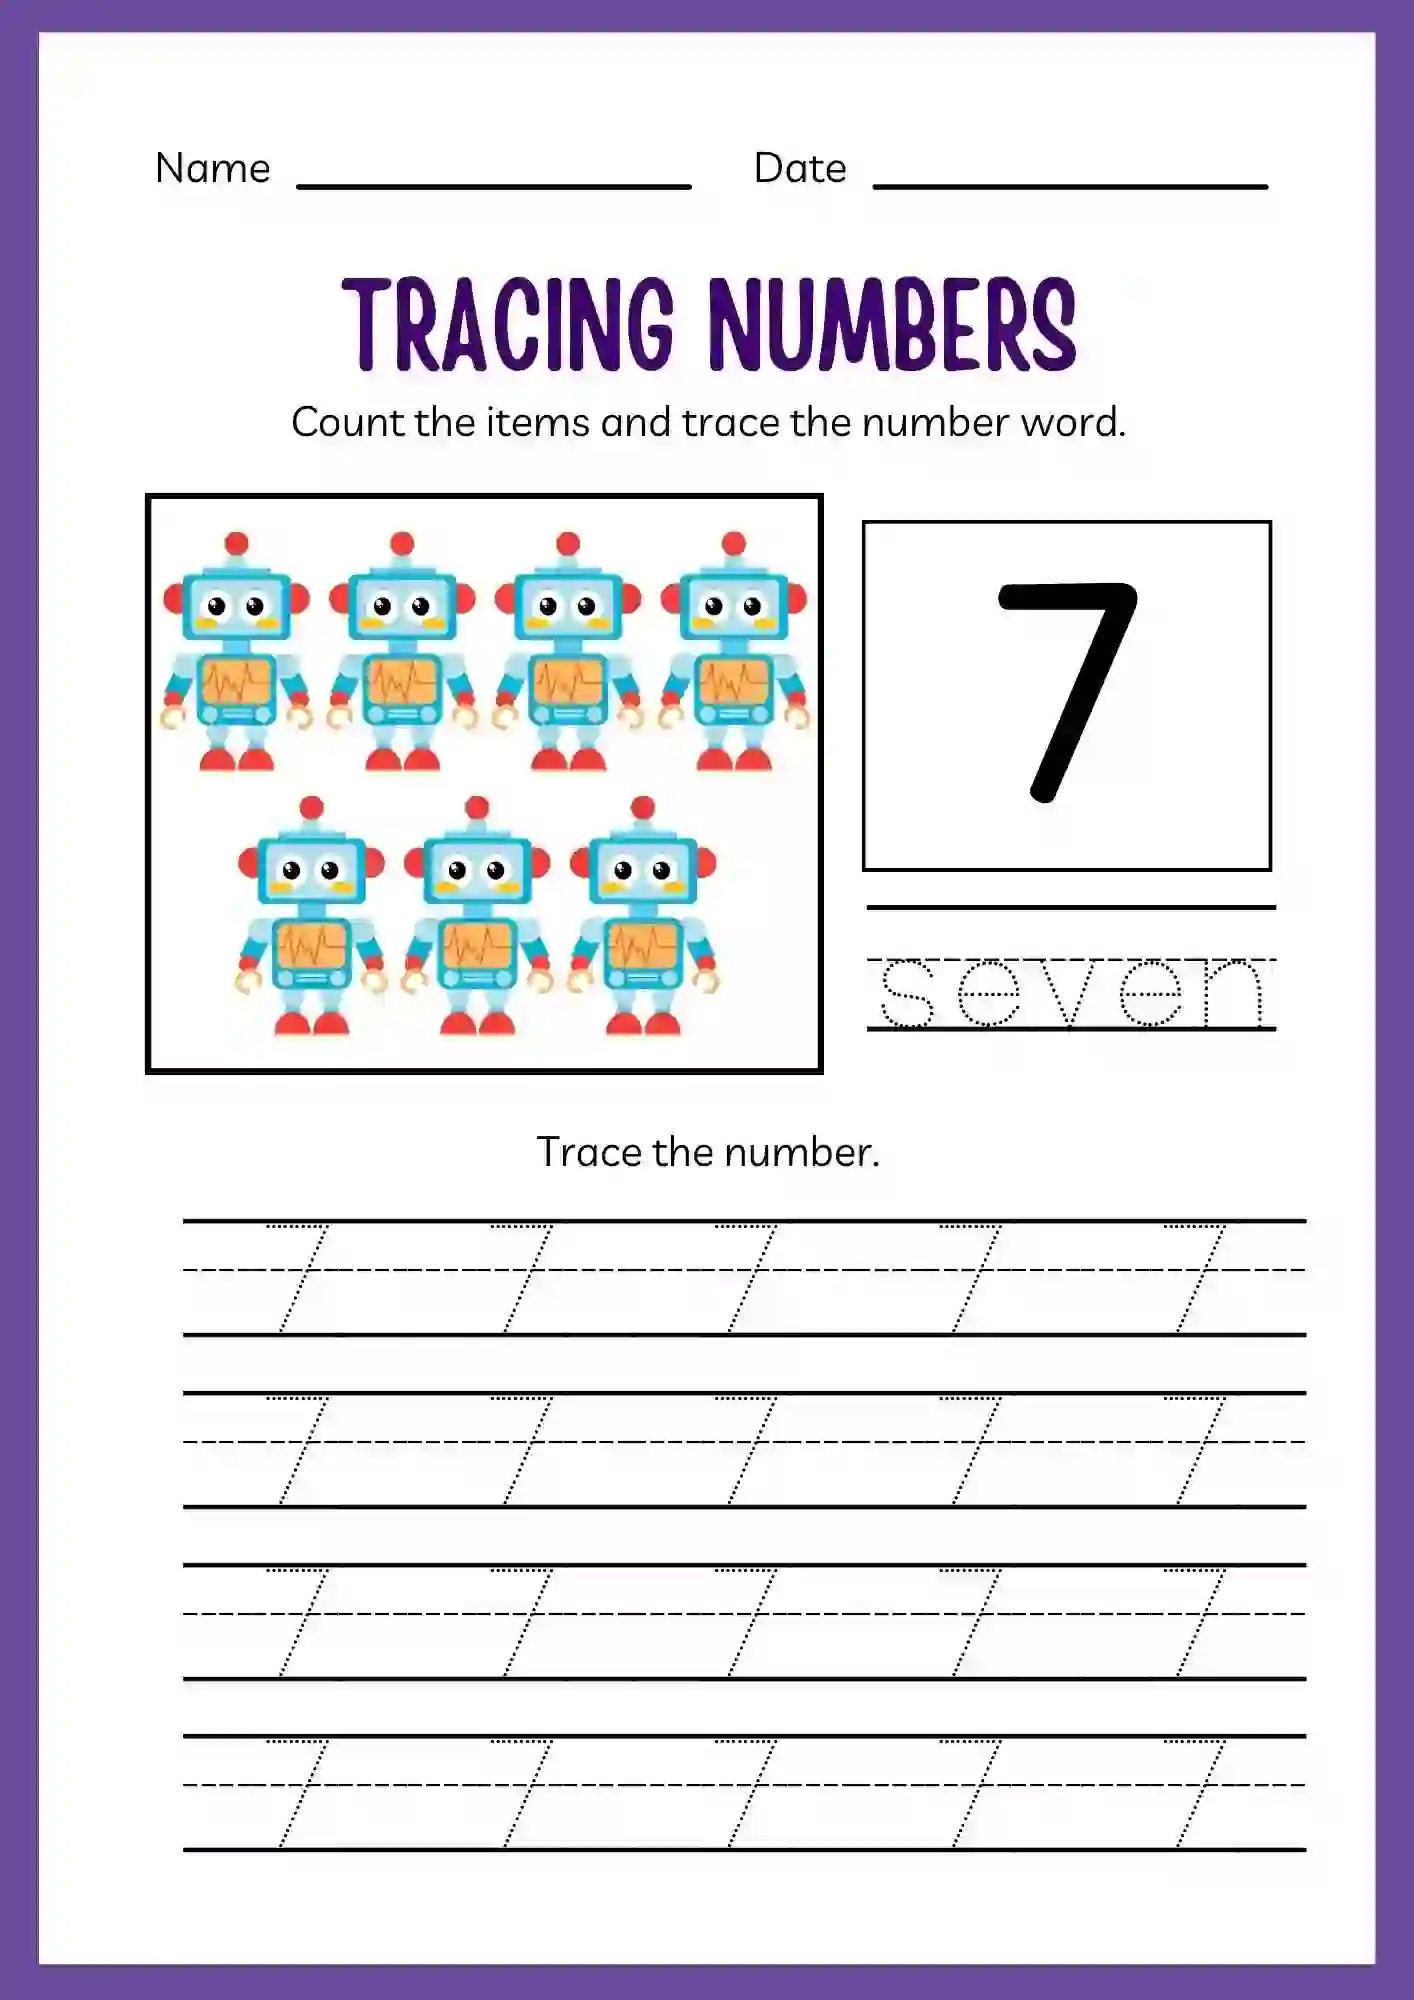 Number Tracing Worksheets 1 to 20 (Number 7 tracing sheet)